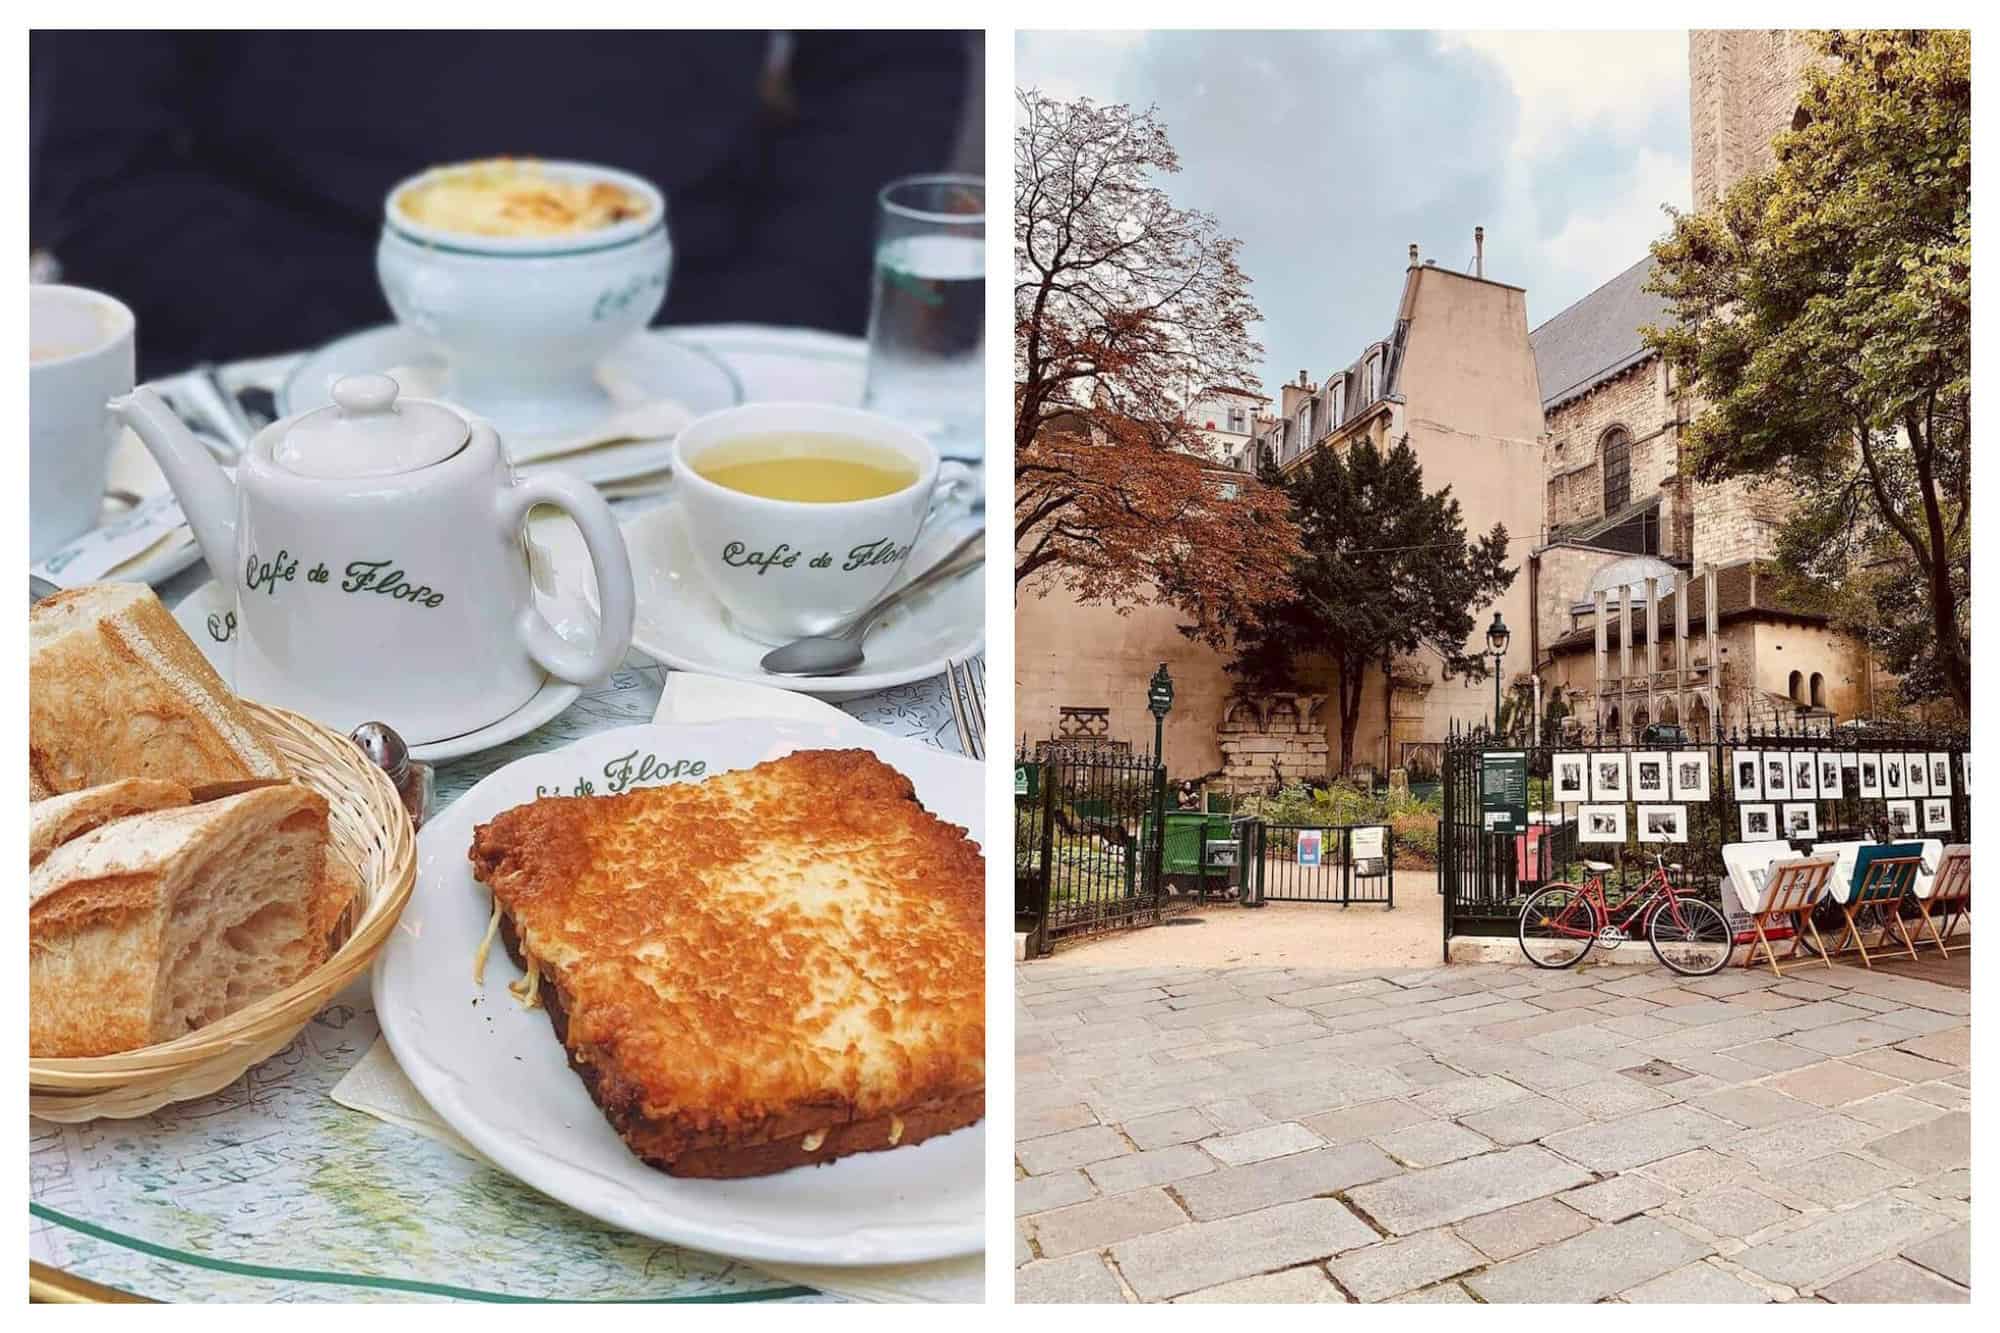 Left: a table at the Café de Flore with a basket of bread on the left, a croque monsieur sandwich on the right, and a tea kettle with two tea cups. There is a bowl of French onion soup on the table behind the tea cups. Right: a cobblestone square with buildings in the background. There is a fence with framed art work on it and a red bike.